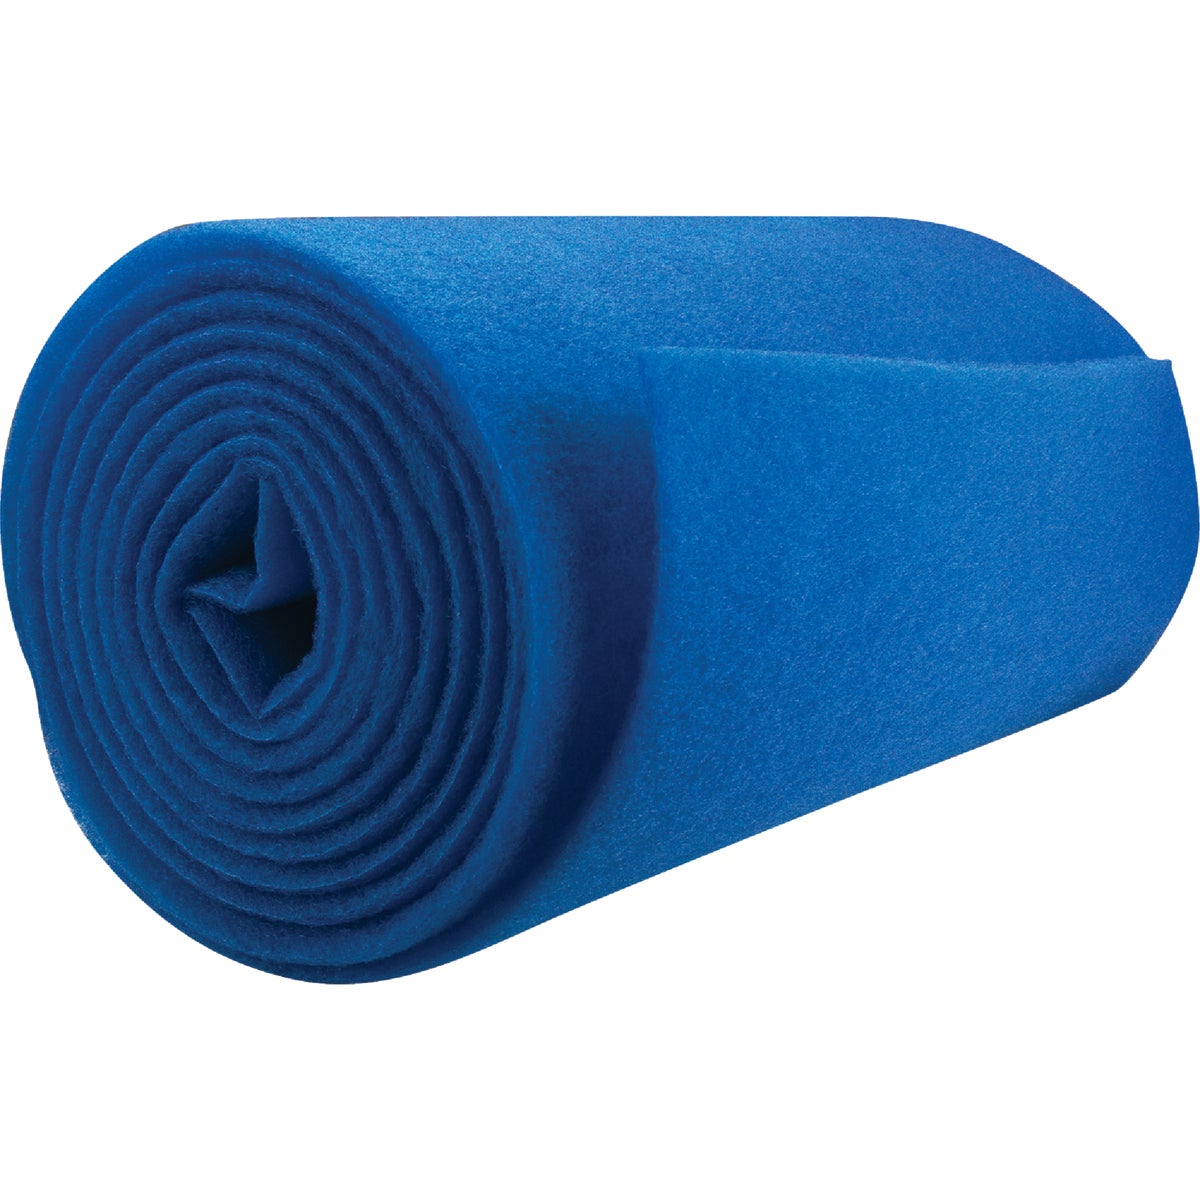 Sythetic Filter Roll 36 In. x 360 In x1